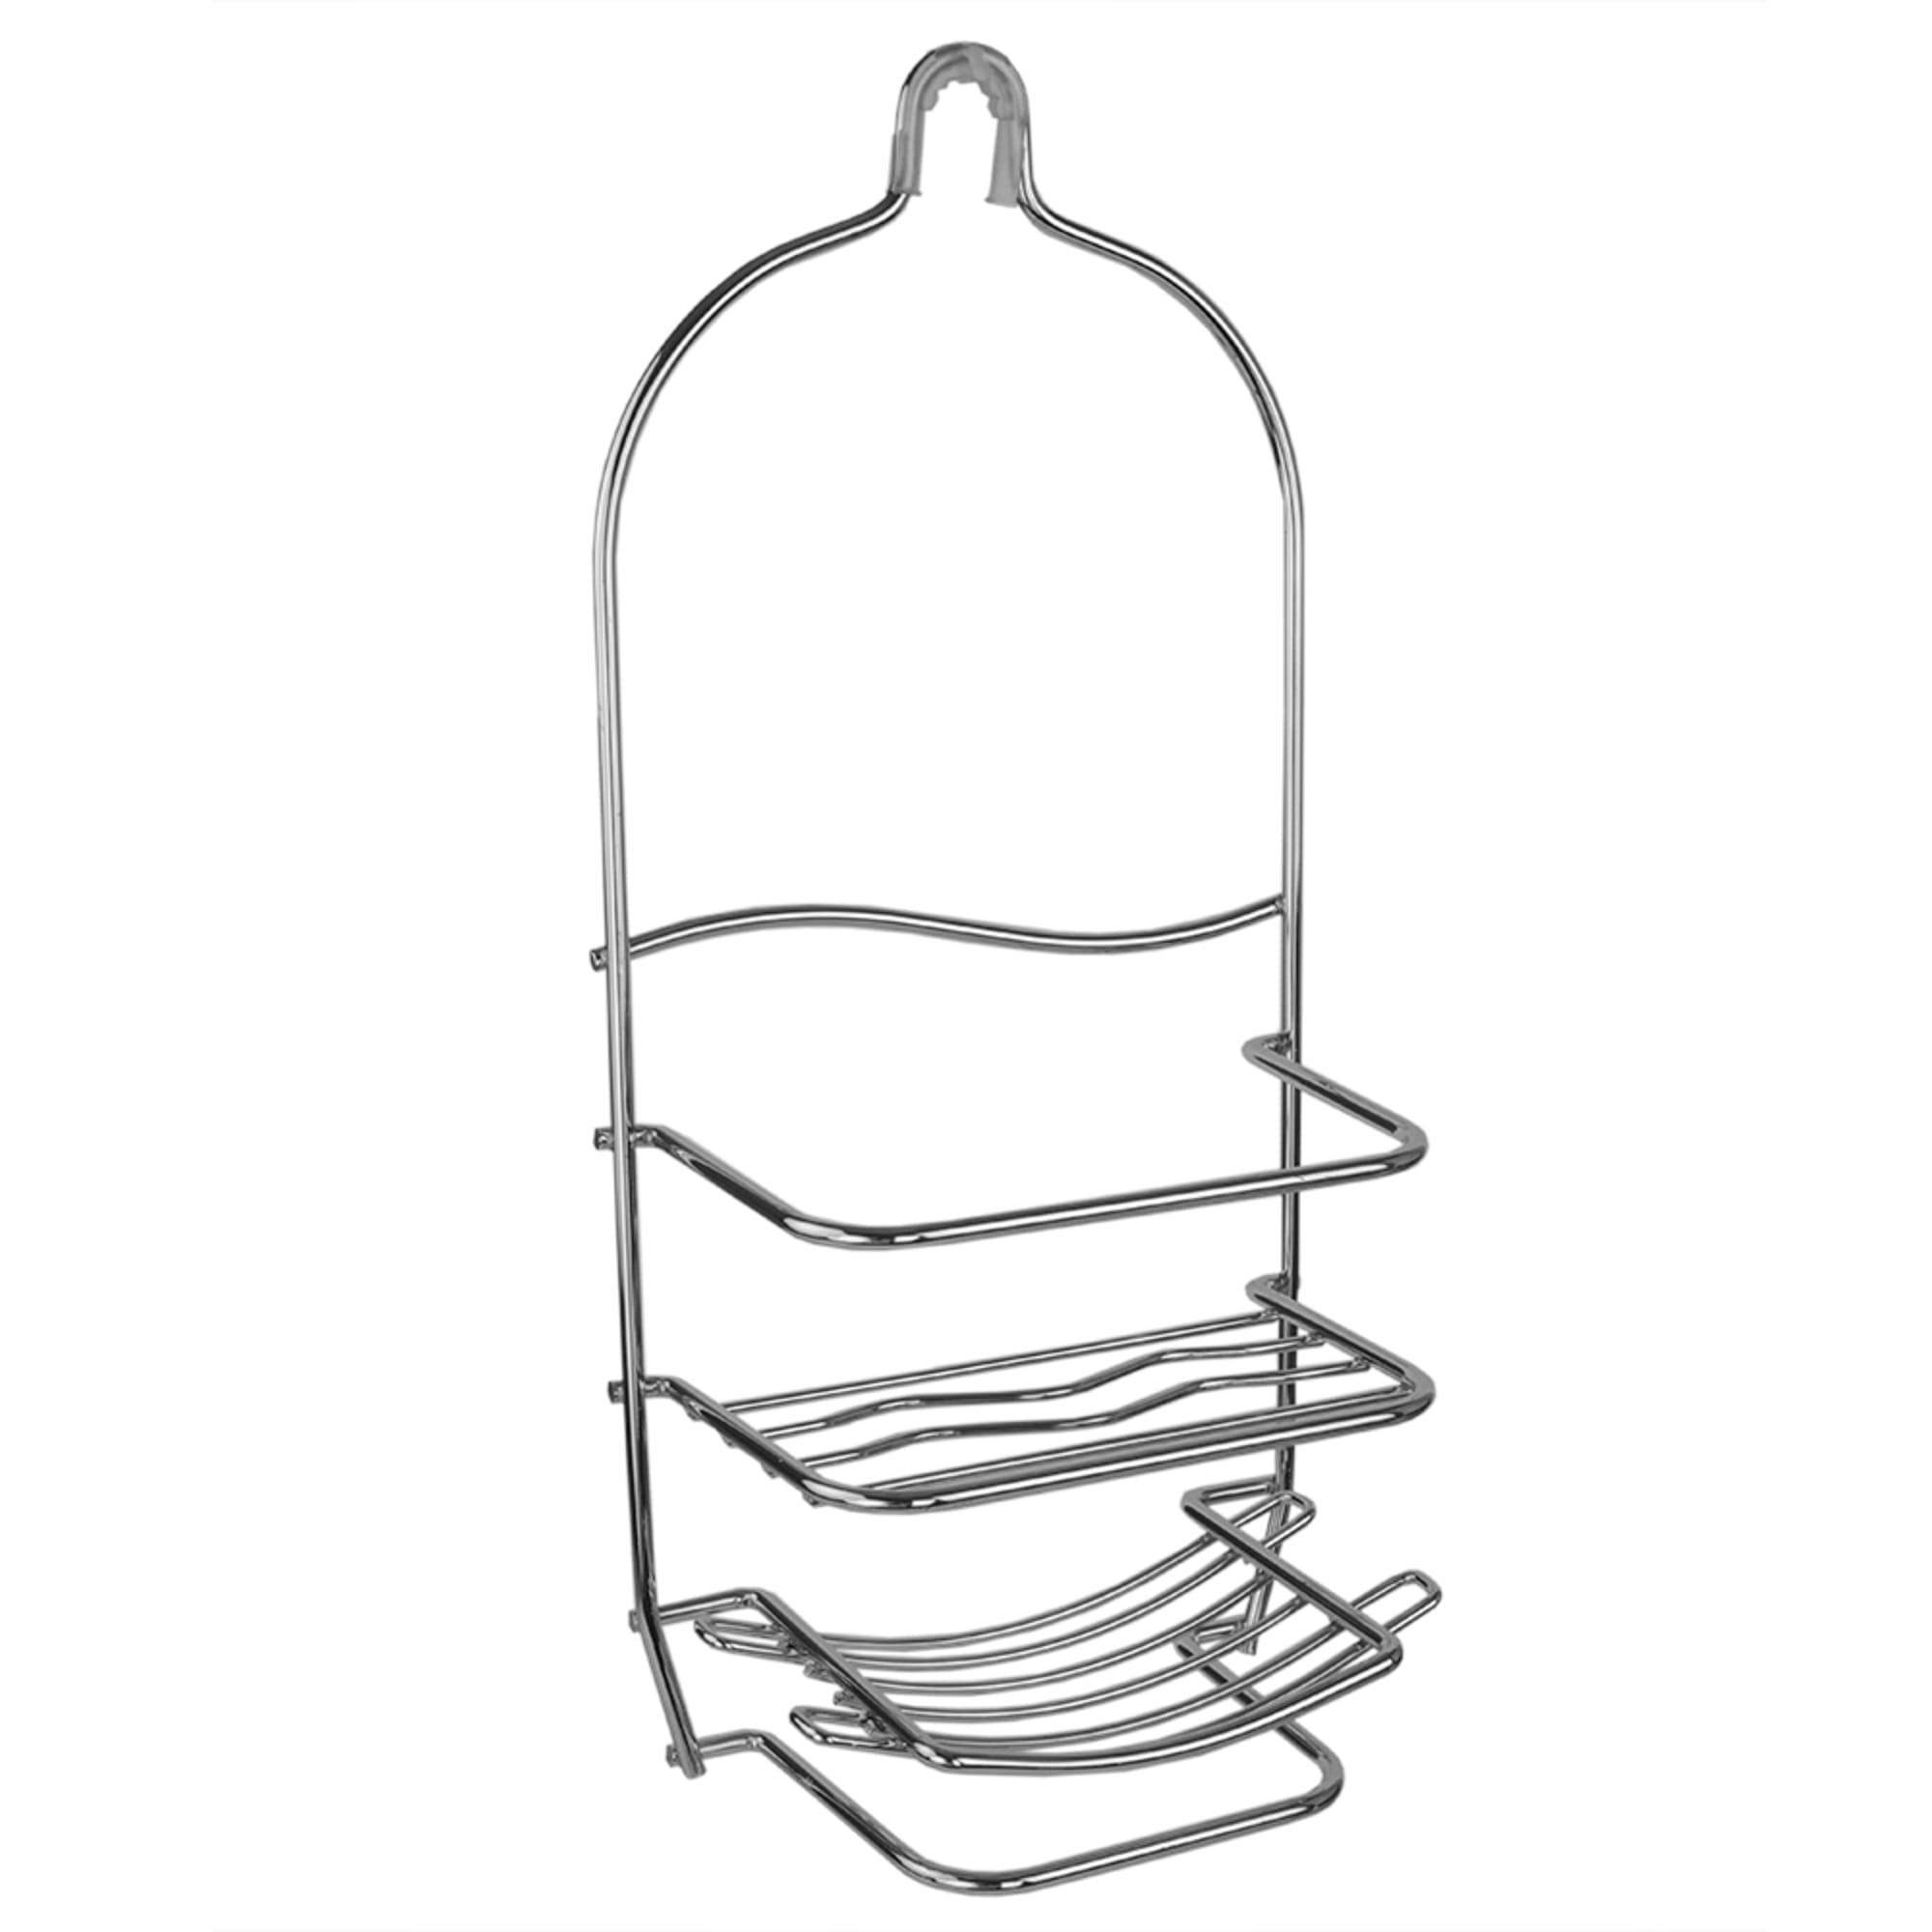 Home Basics Chrome Plated Steel Shower Caddy With Wash Cloth Bar $10.00 EACH, CASE PACK OF 12